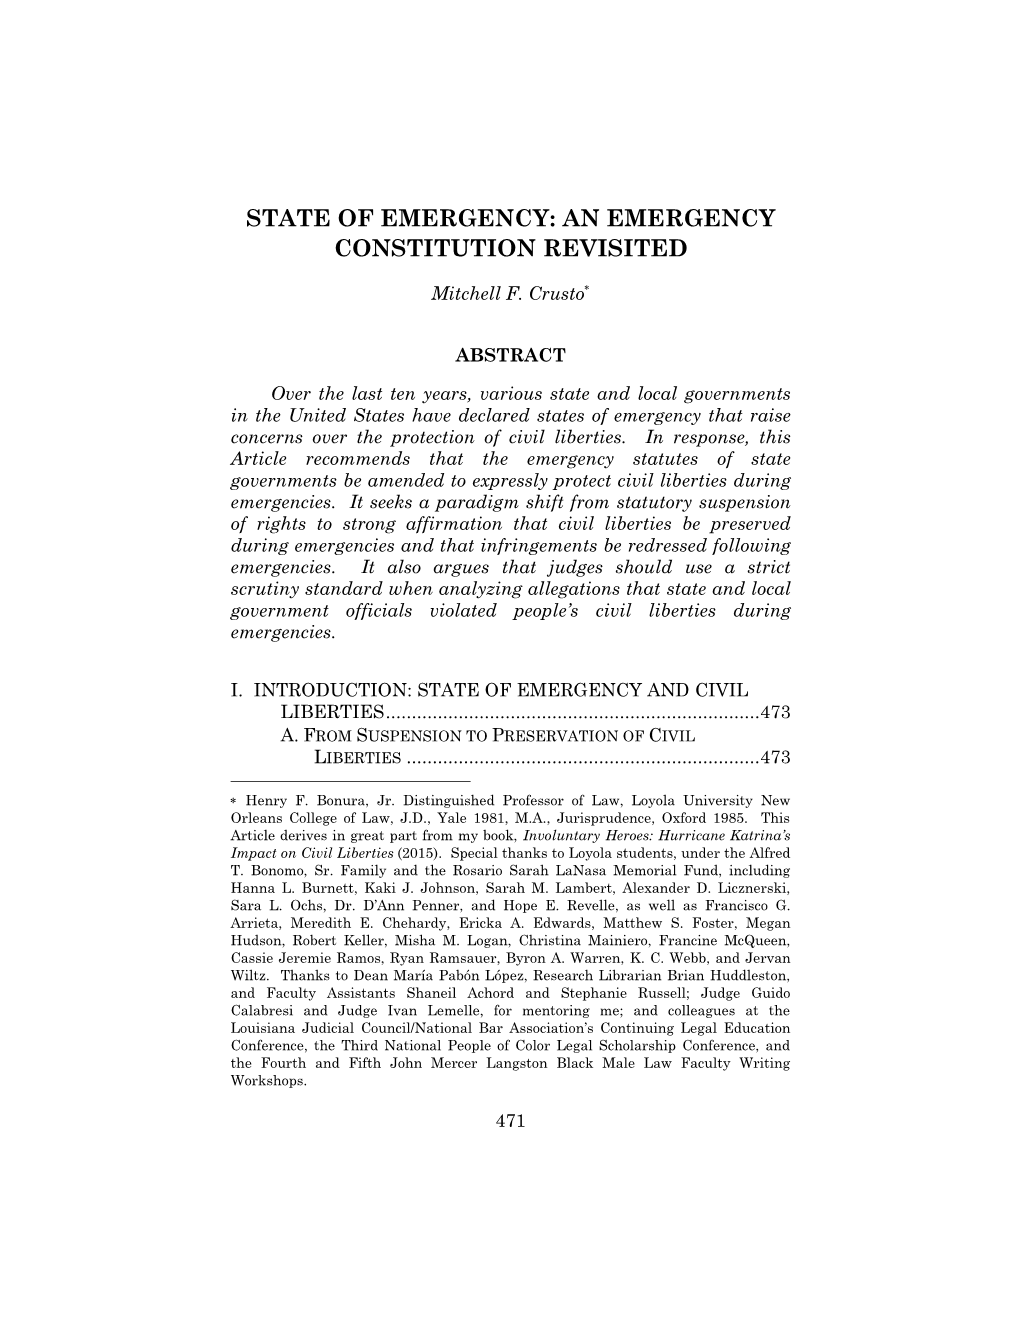 An Emergency Constitution Revisited